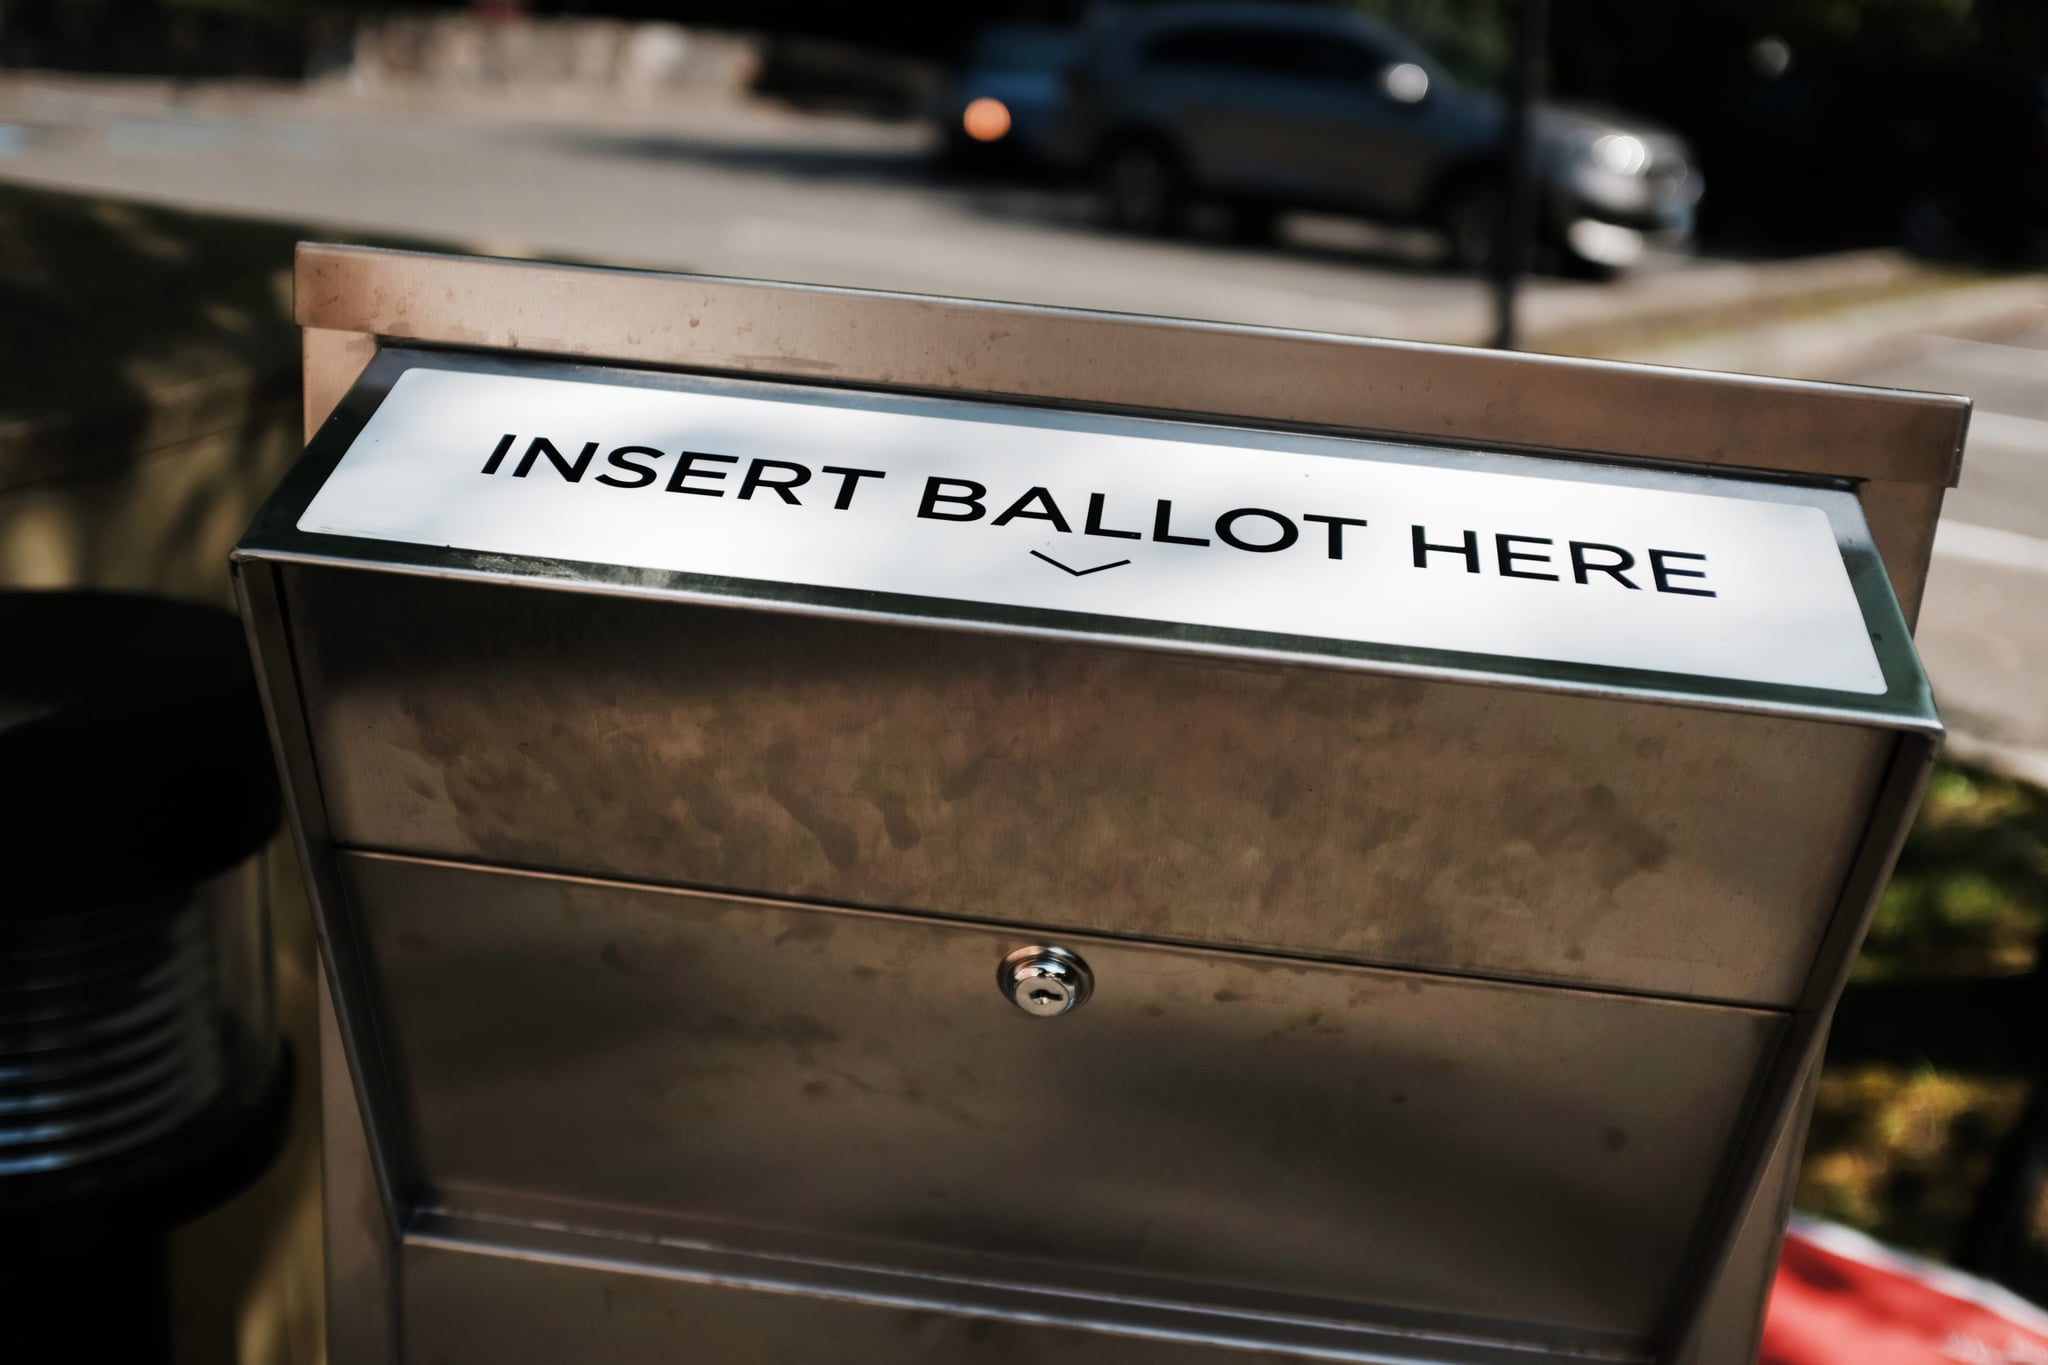 HARTFORD, CONNECTICUT - AUGUST 11: A secure ballot drop box stands at a Stamford library for people to drop off their Connecticut 2020 presidential primary ballots on August 11, 2020 in Stamford, Connecticut. Due to the ongoing COVID-19 pandemic, Connecticut Governor Ned Lamont signed an executive order allowing all registered voters to vote absentee in the August 11, 2020 primary. Connecticut has also experienced fallout from the recent tropical storm, which knocked out power to half of the state at its peak. President Trump has been critical of the absentee ballot process saying it contributes to voter fraud.  (Photo by Spencer Platt/Getty Images)